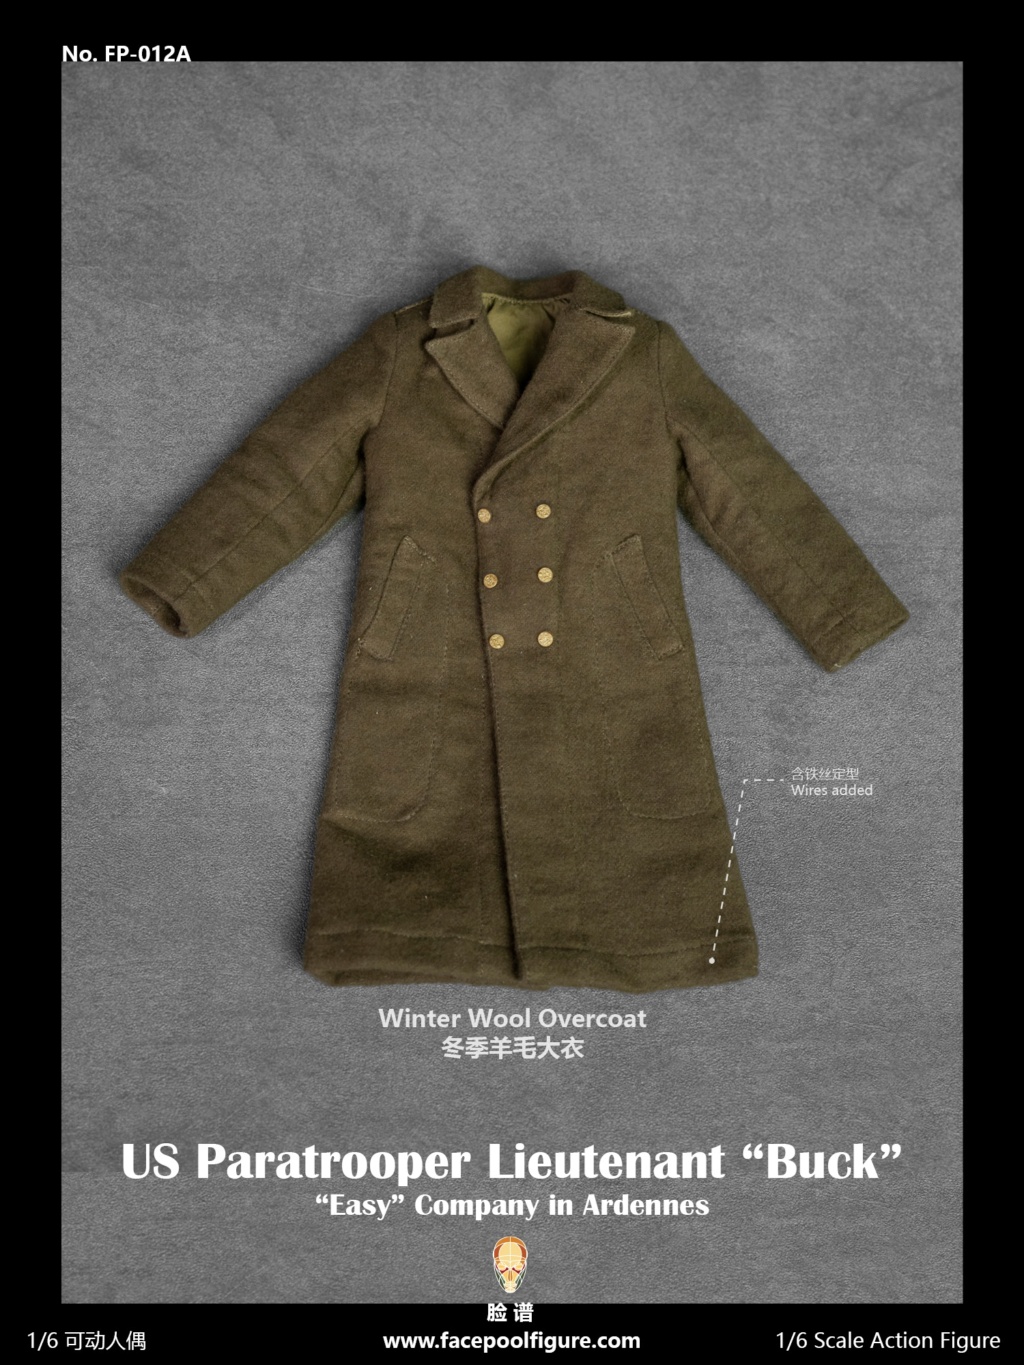 cableTV-based - NEW PRODUCT: Facepool: 1/6 Scale US Paratrooper Lieutenant “Buck” (FP012A & B) (2 versions) 10142910